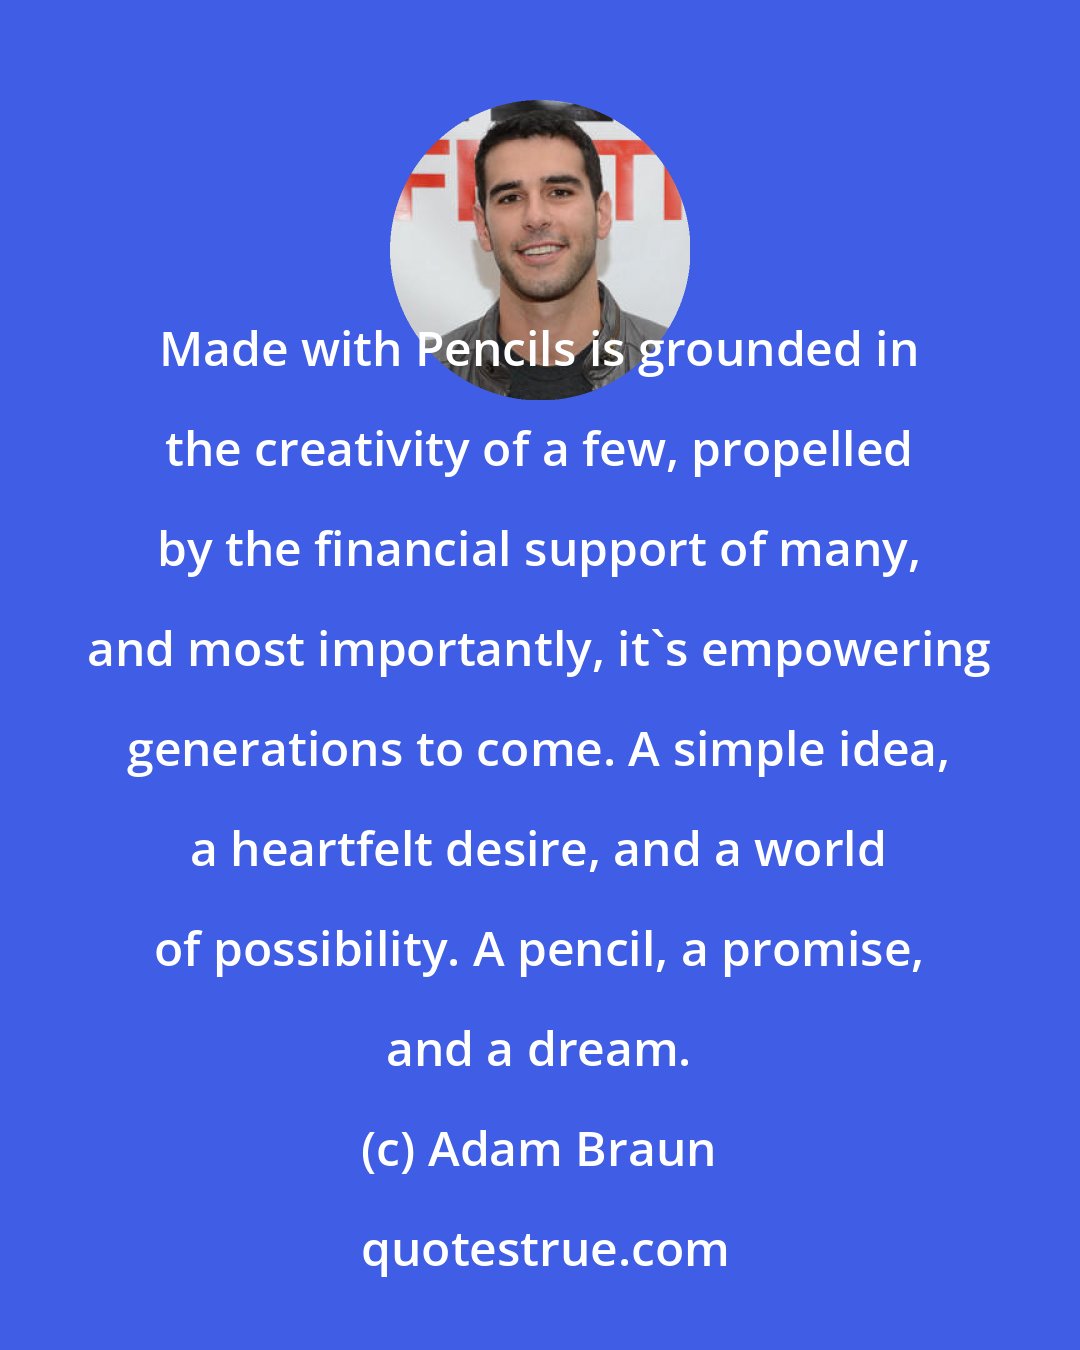 Adam Braun: Made with Pencils is grounded in the creativity of a few, propelled by the financial support of many, and most importantly, it's empowering generations to come. A simple idea, a heartfelt desire, and a world of possibility. A pencil, a promise, and a dream.